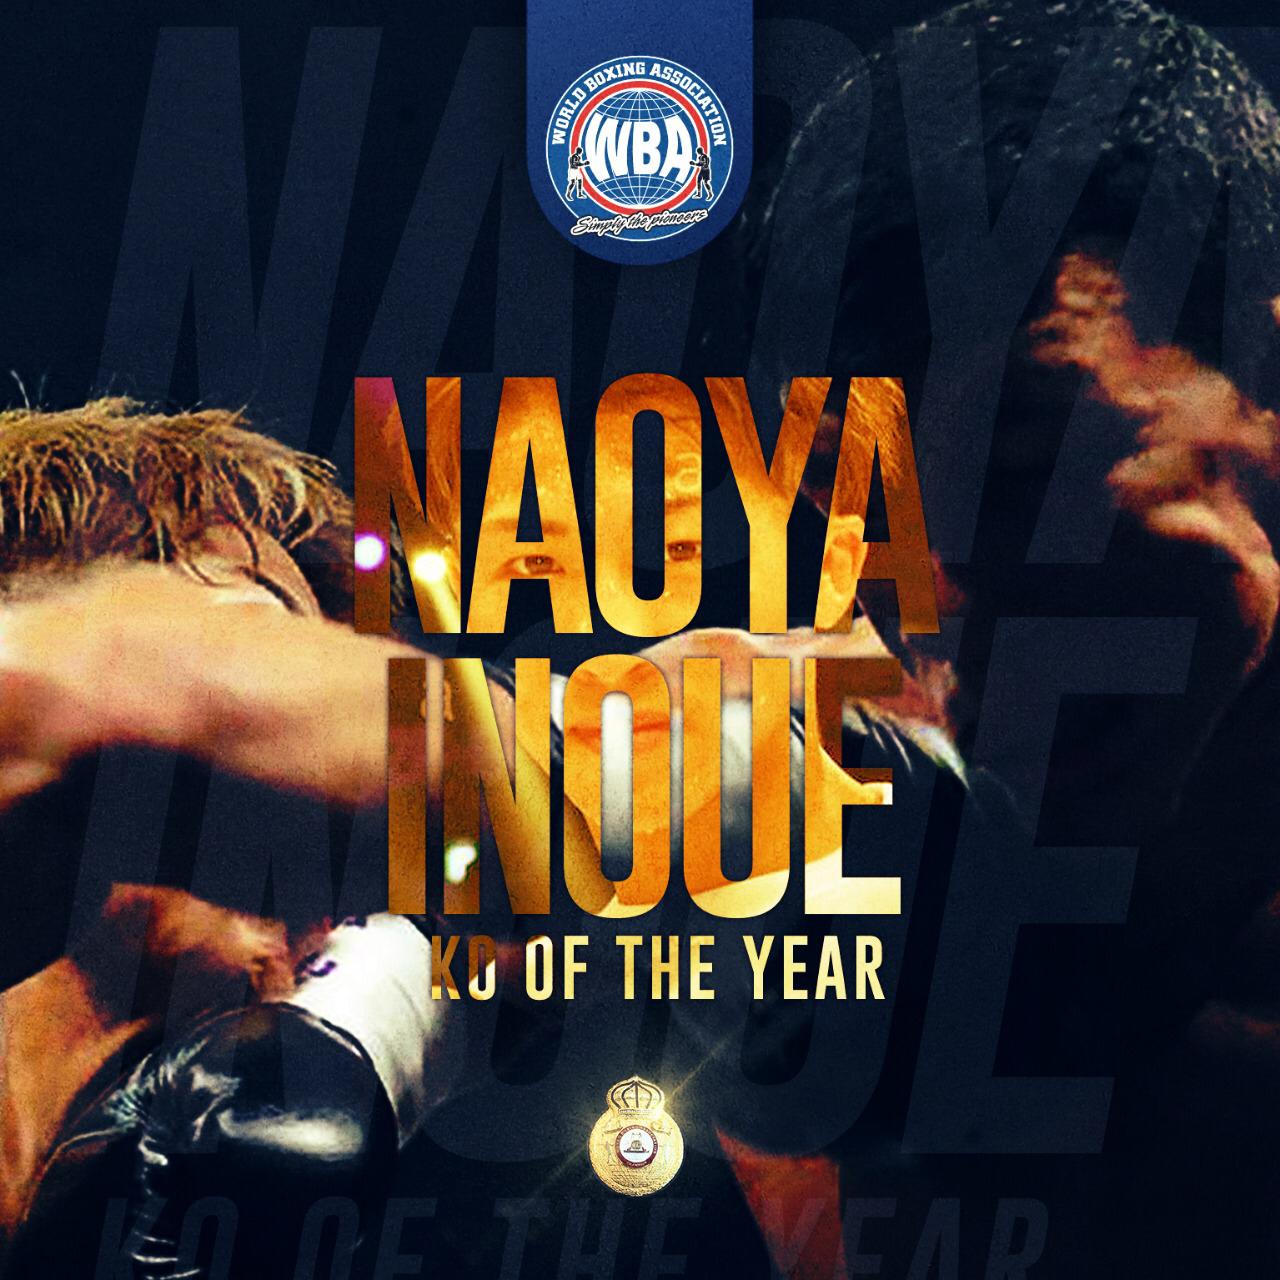 Naoya Inoue earns WBA knockout of the year honors